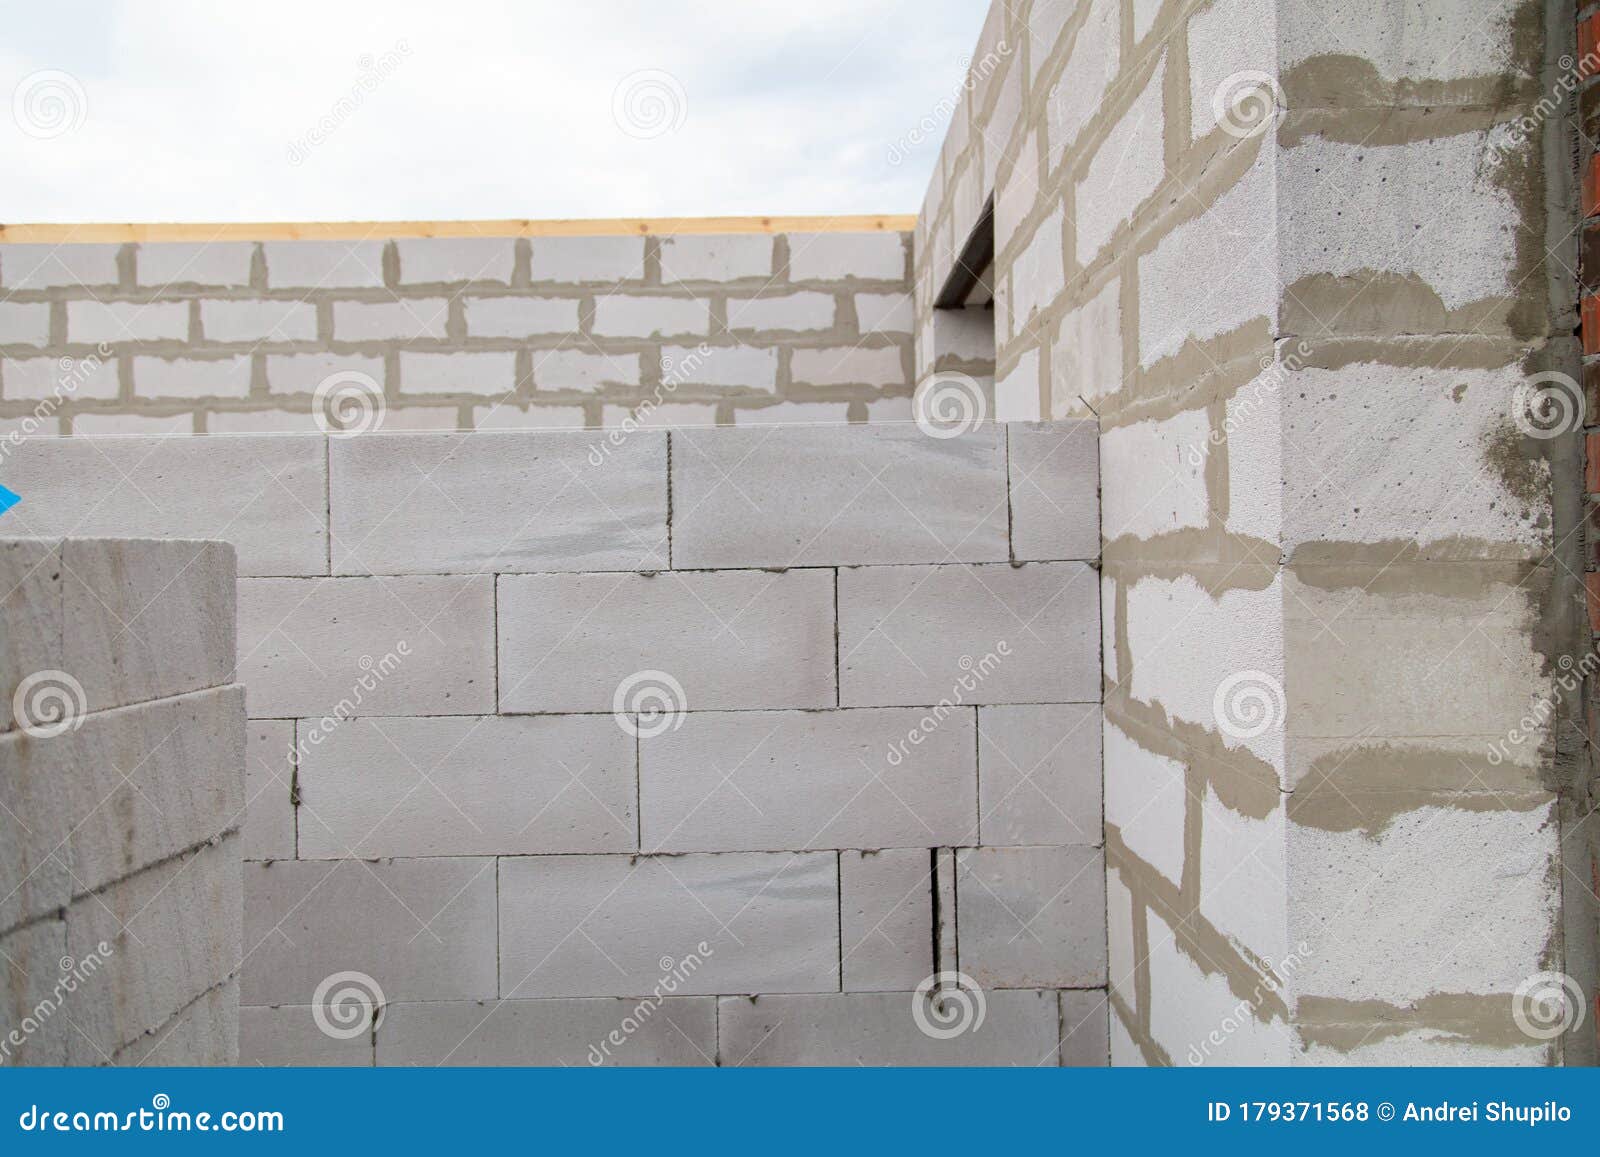 Foam Bricks in a House Under Construction Stock Photo - Image of